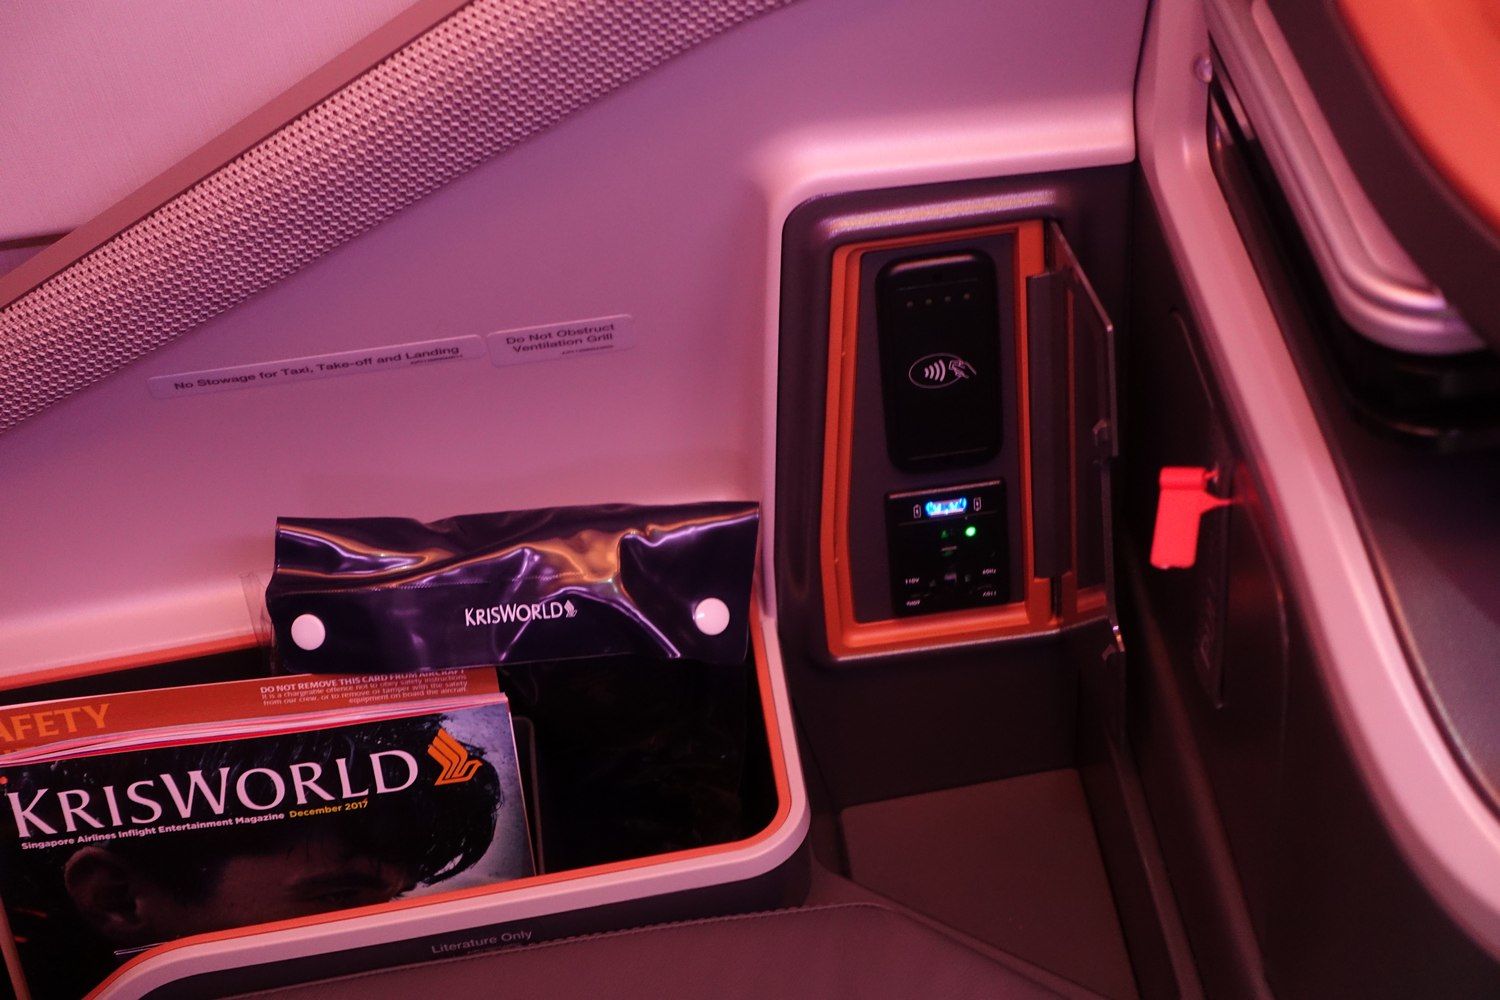 Singapore Airlines' new A380 Business Class Seat